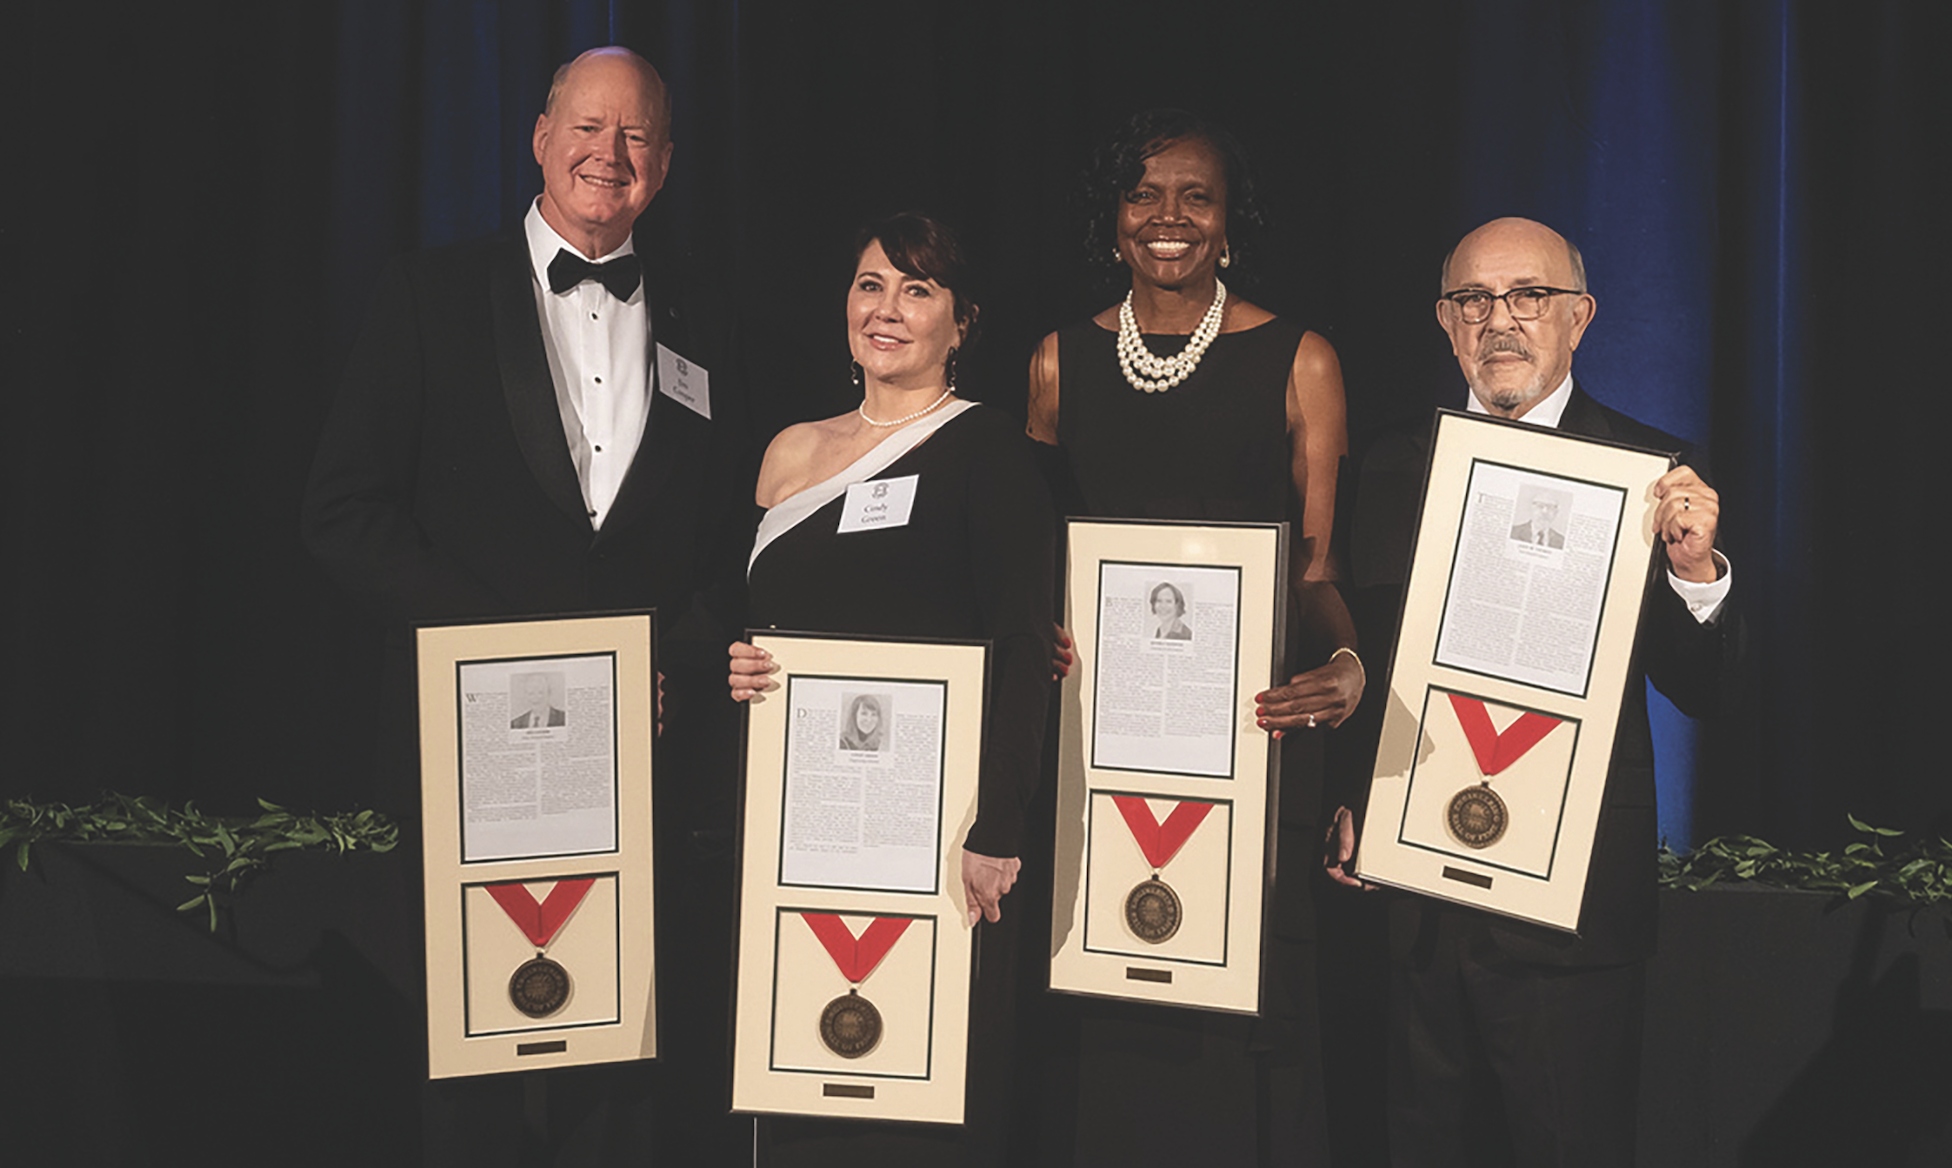 The State of Alabama Engineering Hall of Fame inducted nine individuals to the Class of 2021, including four from Auburn University. From left, the Auburn inductees include Jim Cooper, ’81 civil
engineering and founder of Cooper Construction; Cindy Green, ’79 chemical engineering and retired chief sales and marketing officer for DuPont; Beverly Banister, ’83 chemical engineering and retired
deputy regional administrator for the Environmental Protection Agency’s Region 4; and John Thomas, ’60 mechanical engineering and consultant for Lee & Associates.